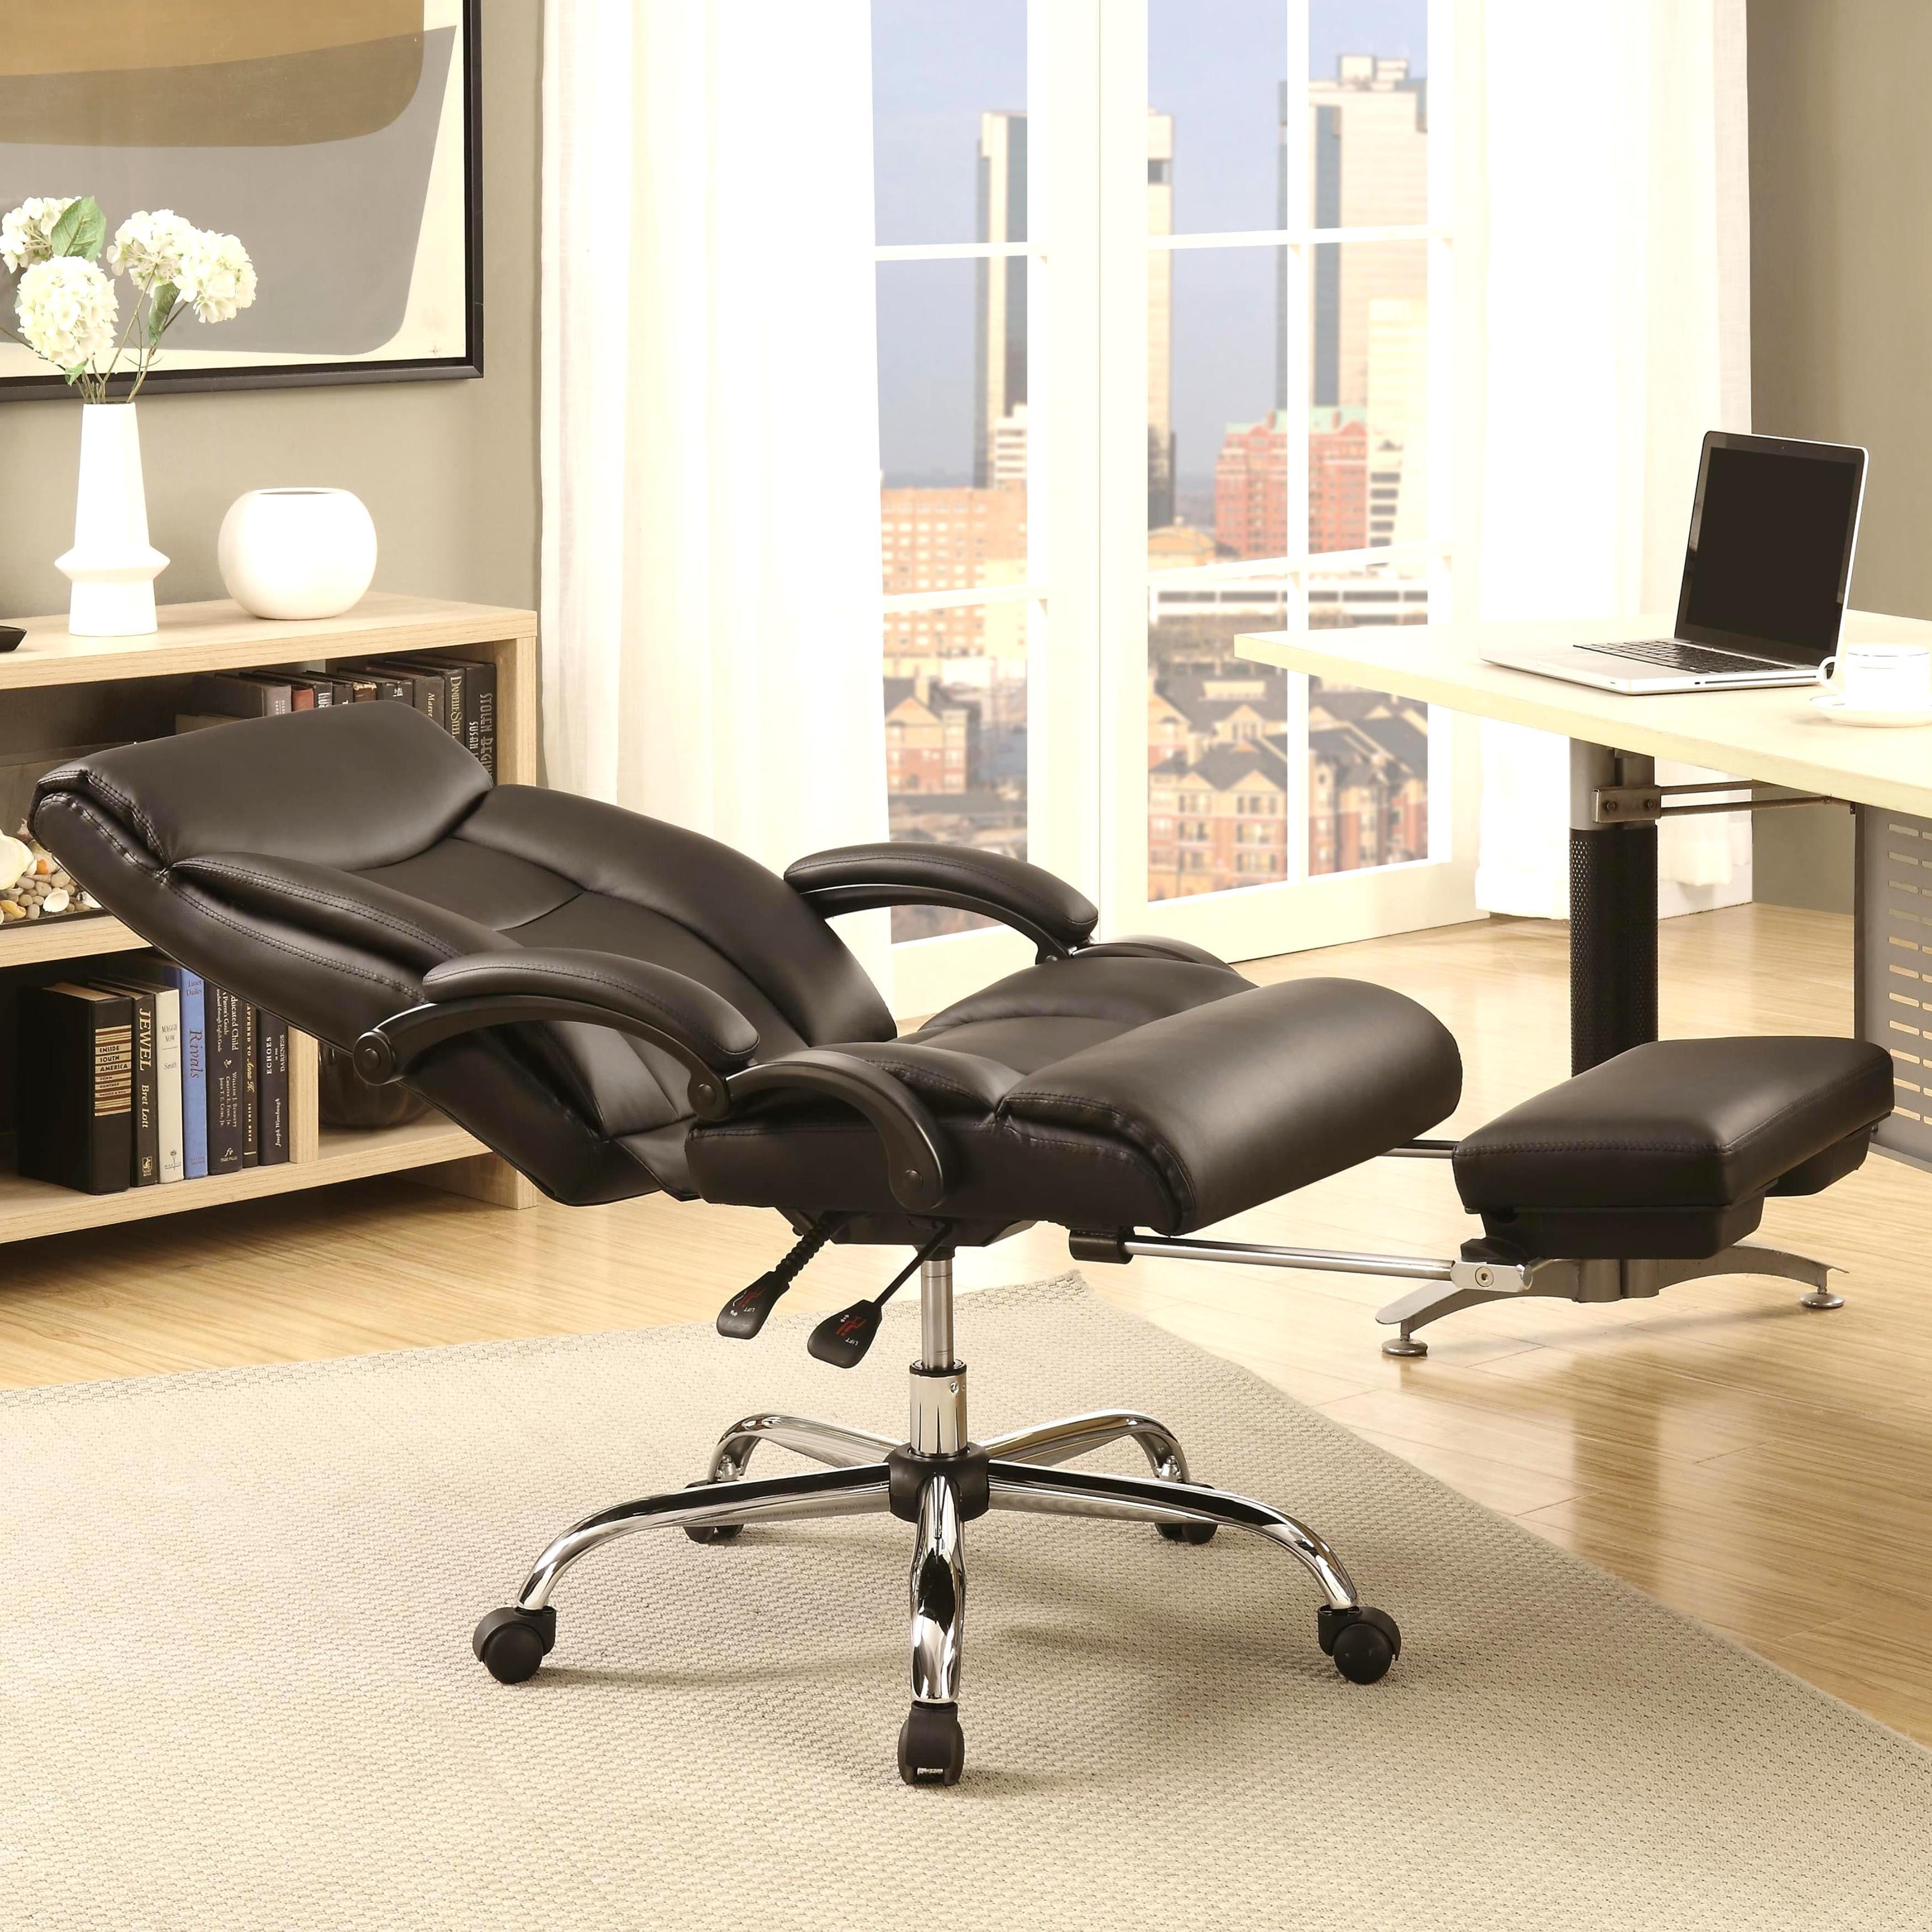 A Line Furniture Executive Adjustable Reclining Office ...